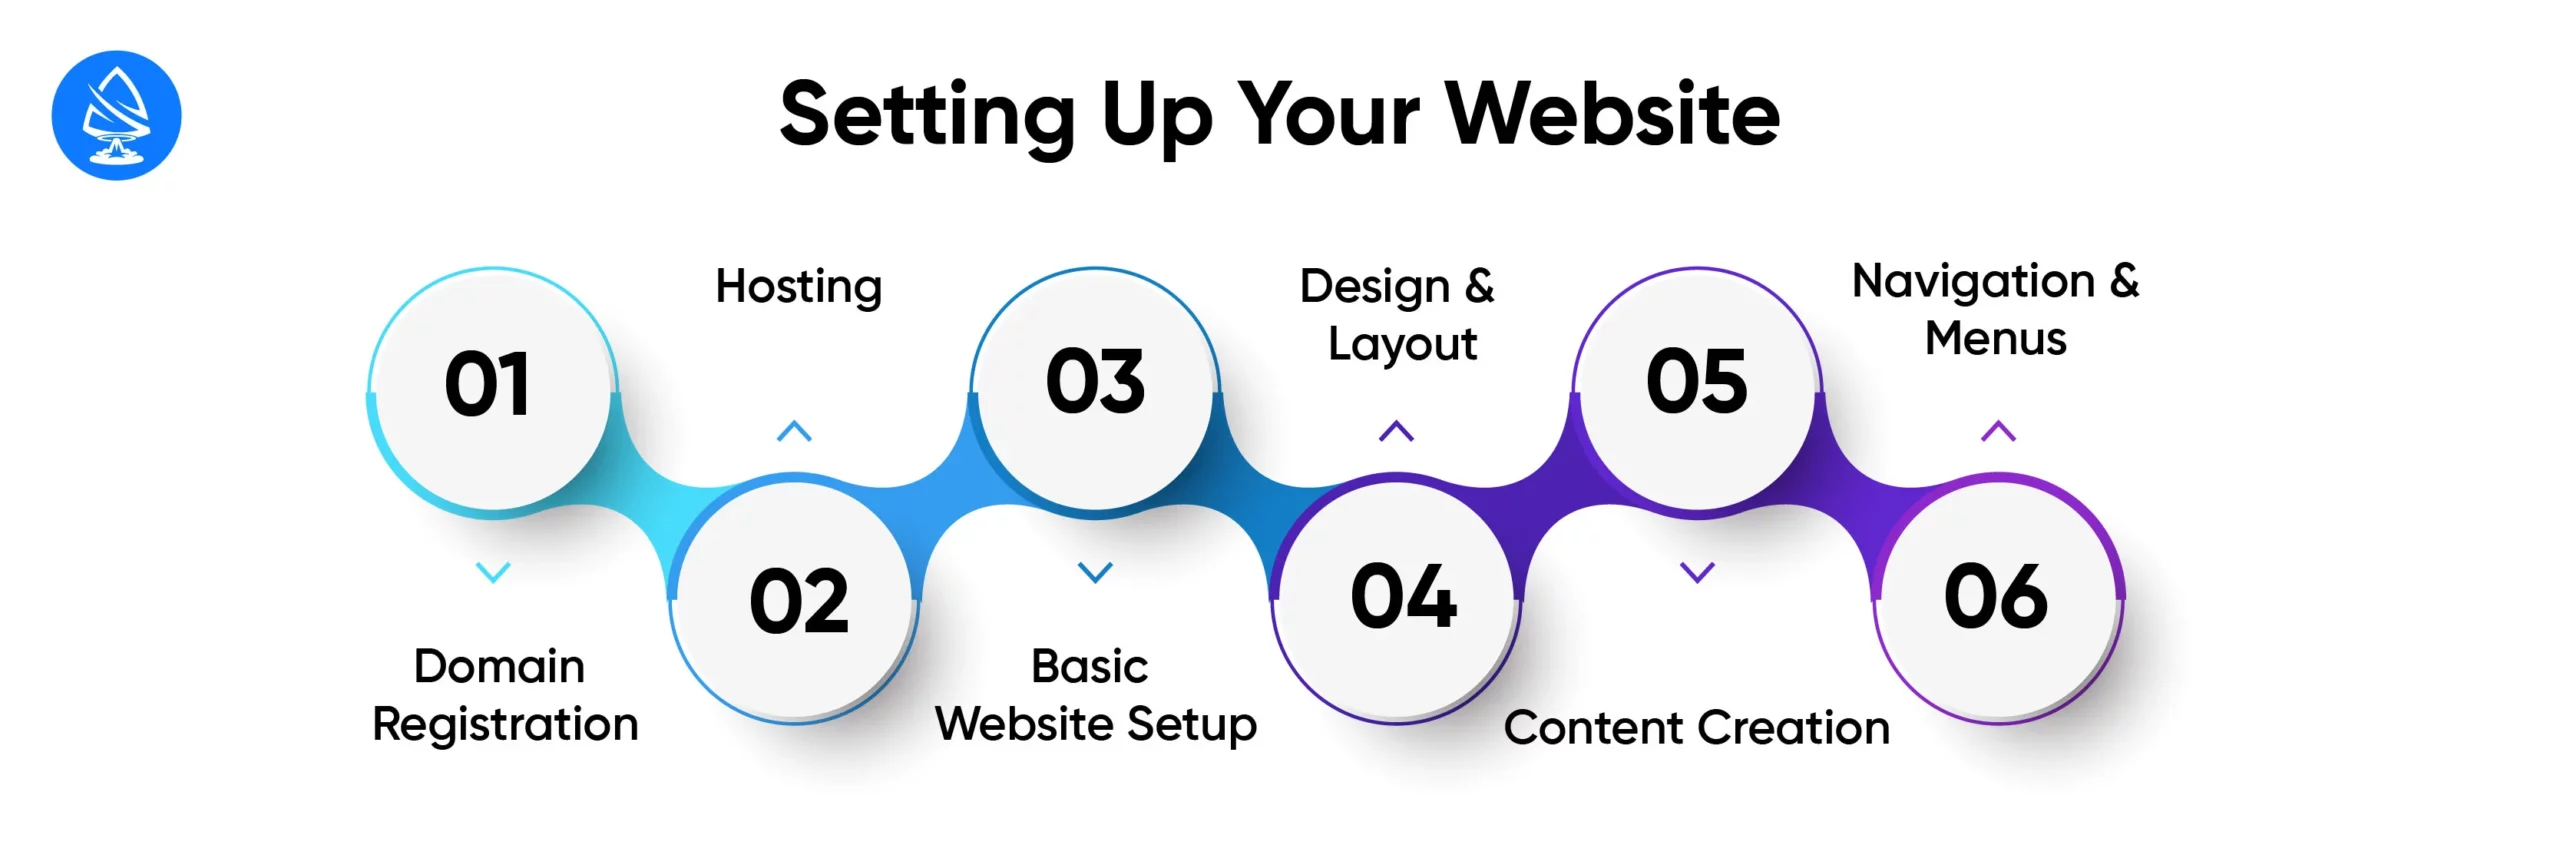 Setting Up Your Website 